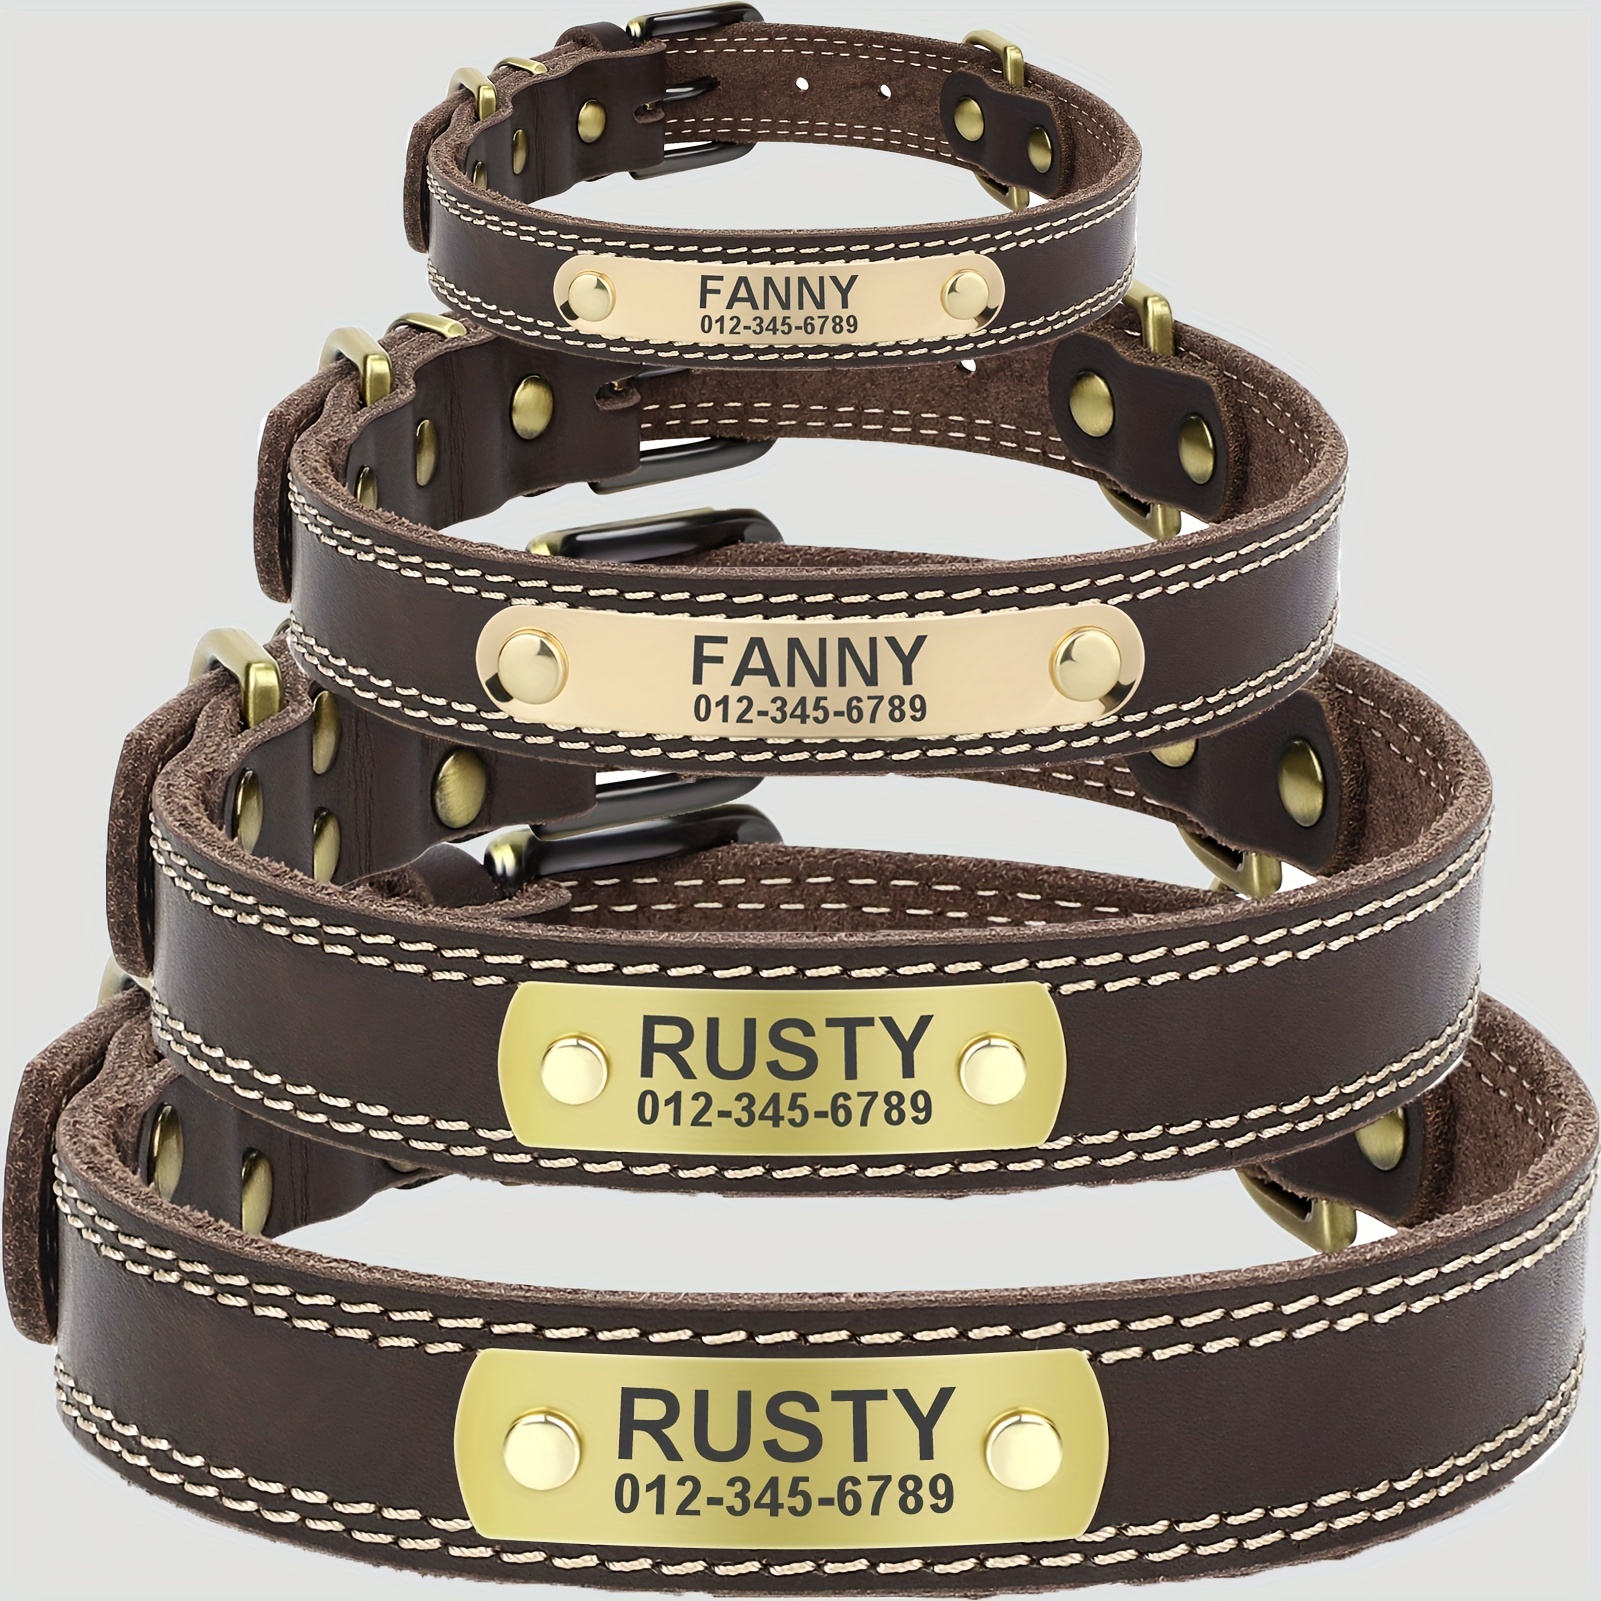 

Personalized Custom Heavy Duty Dog Collar With Engraved Nameplate, Customizable Durable Name Tag Collar, Comfortable Soft Genuine Leather Id Collars For Small, Medium, Large Dogs